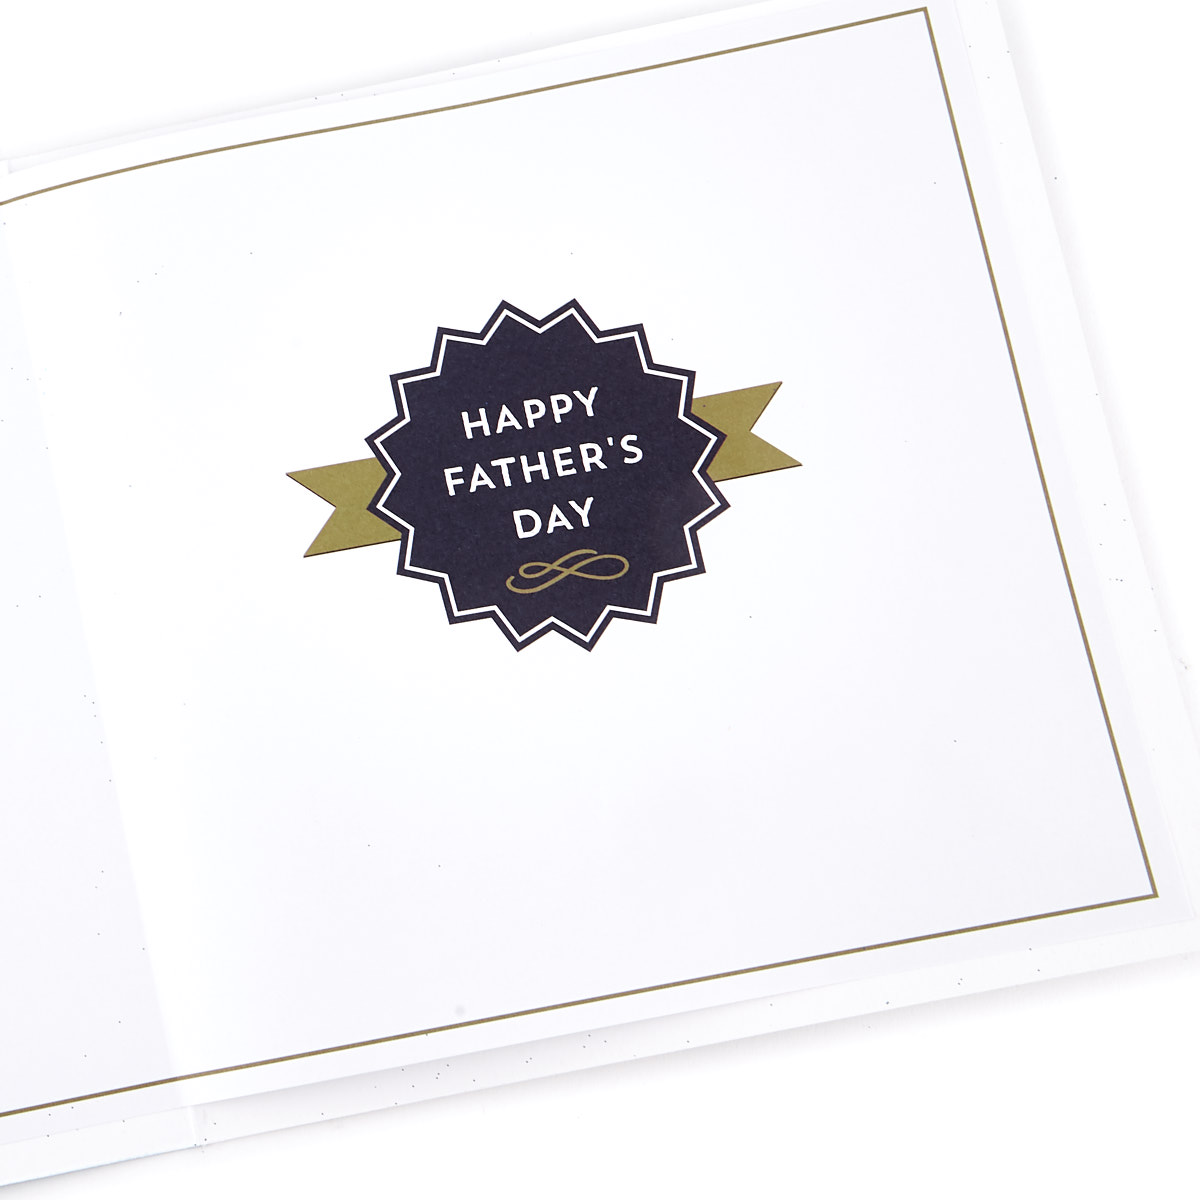 Exquisite Collection Father's Day Card - National & International Recipients (Stickers Included)